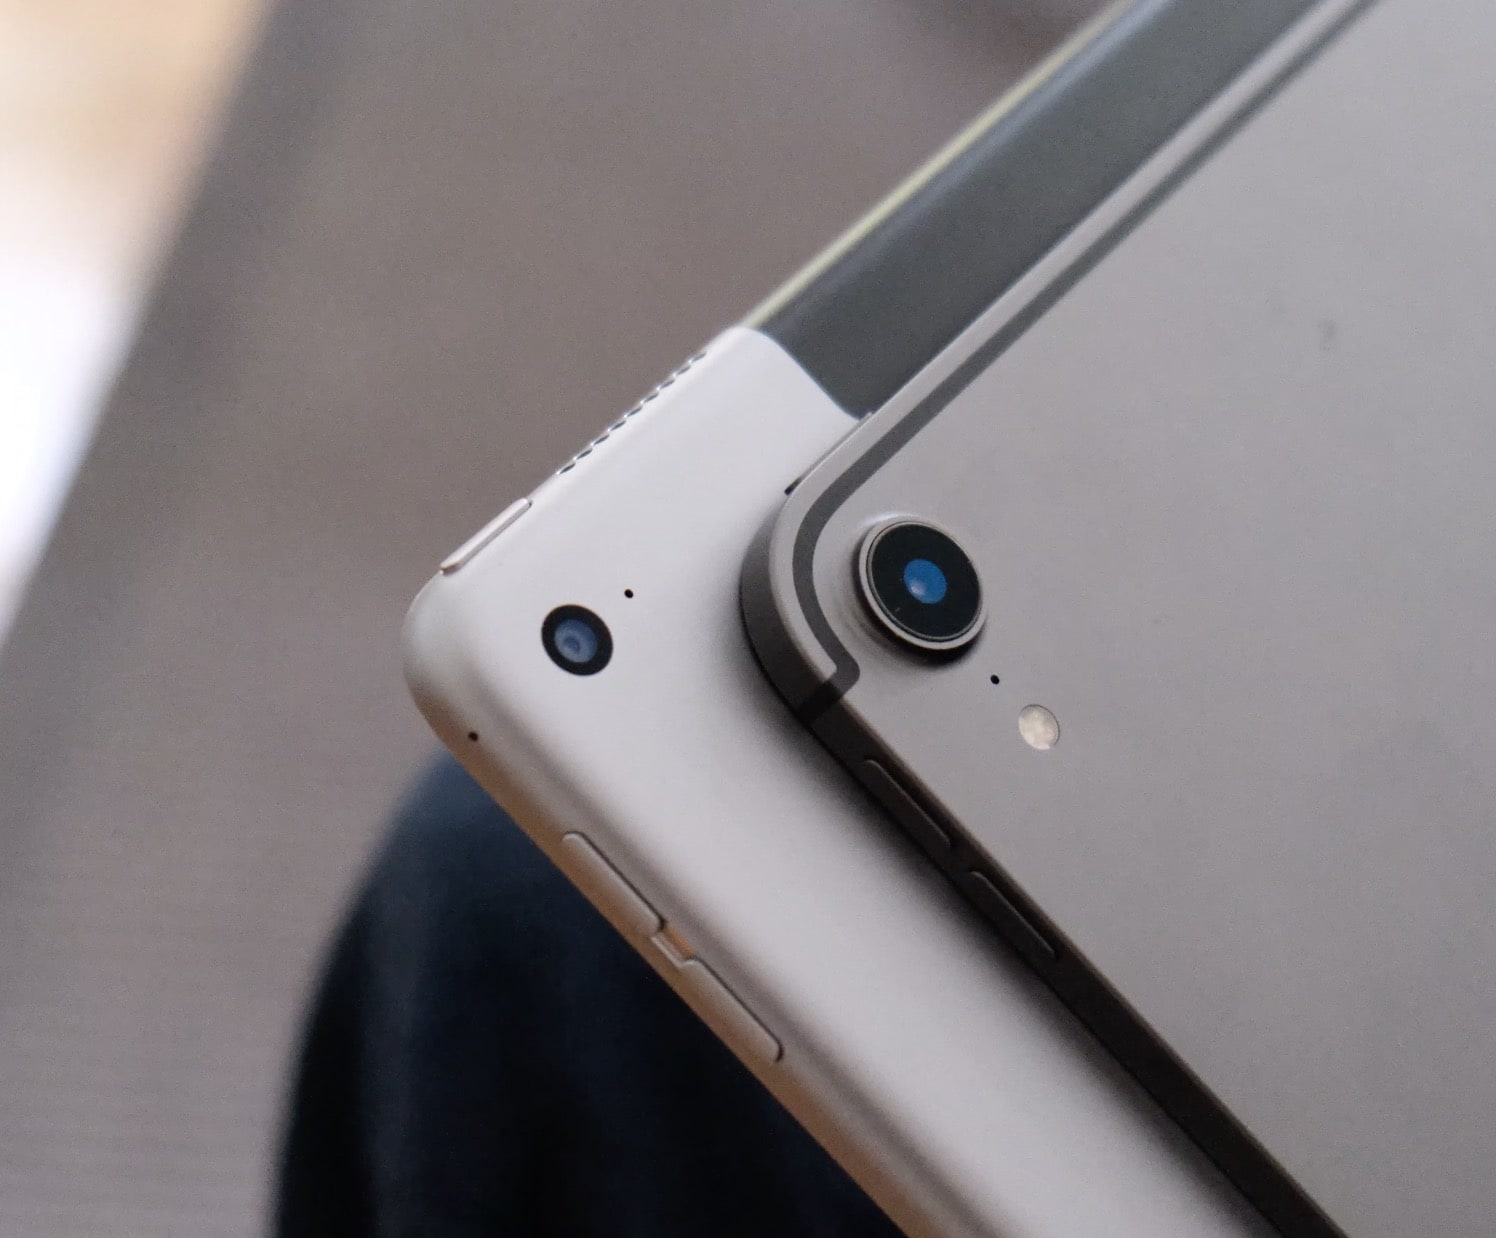 The new camera dumps all over the one in the first-gen iPad Pro.